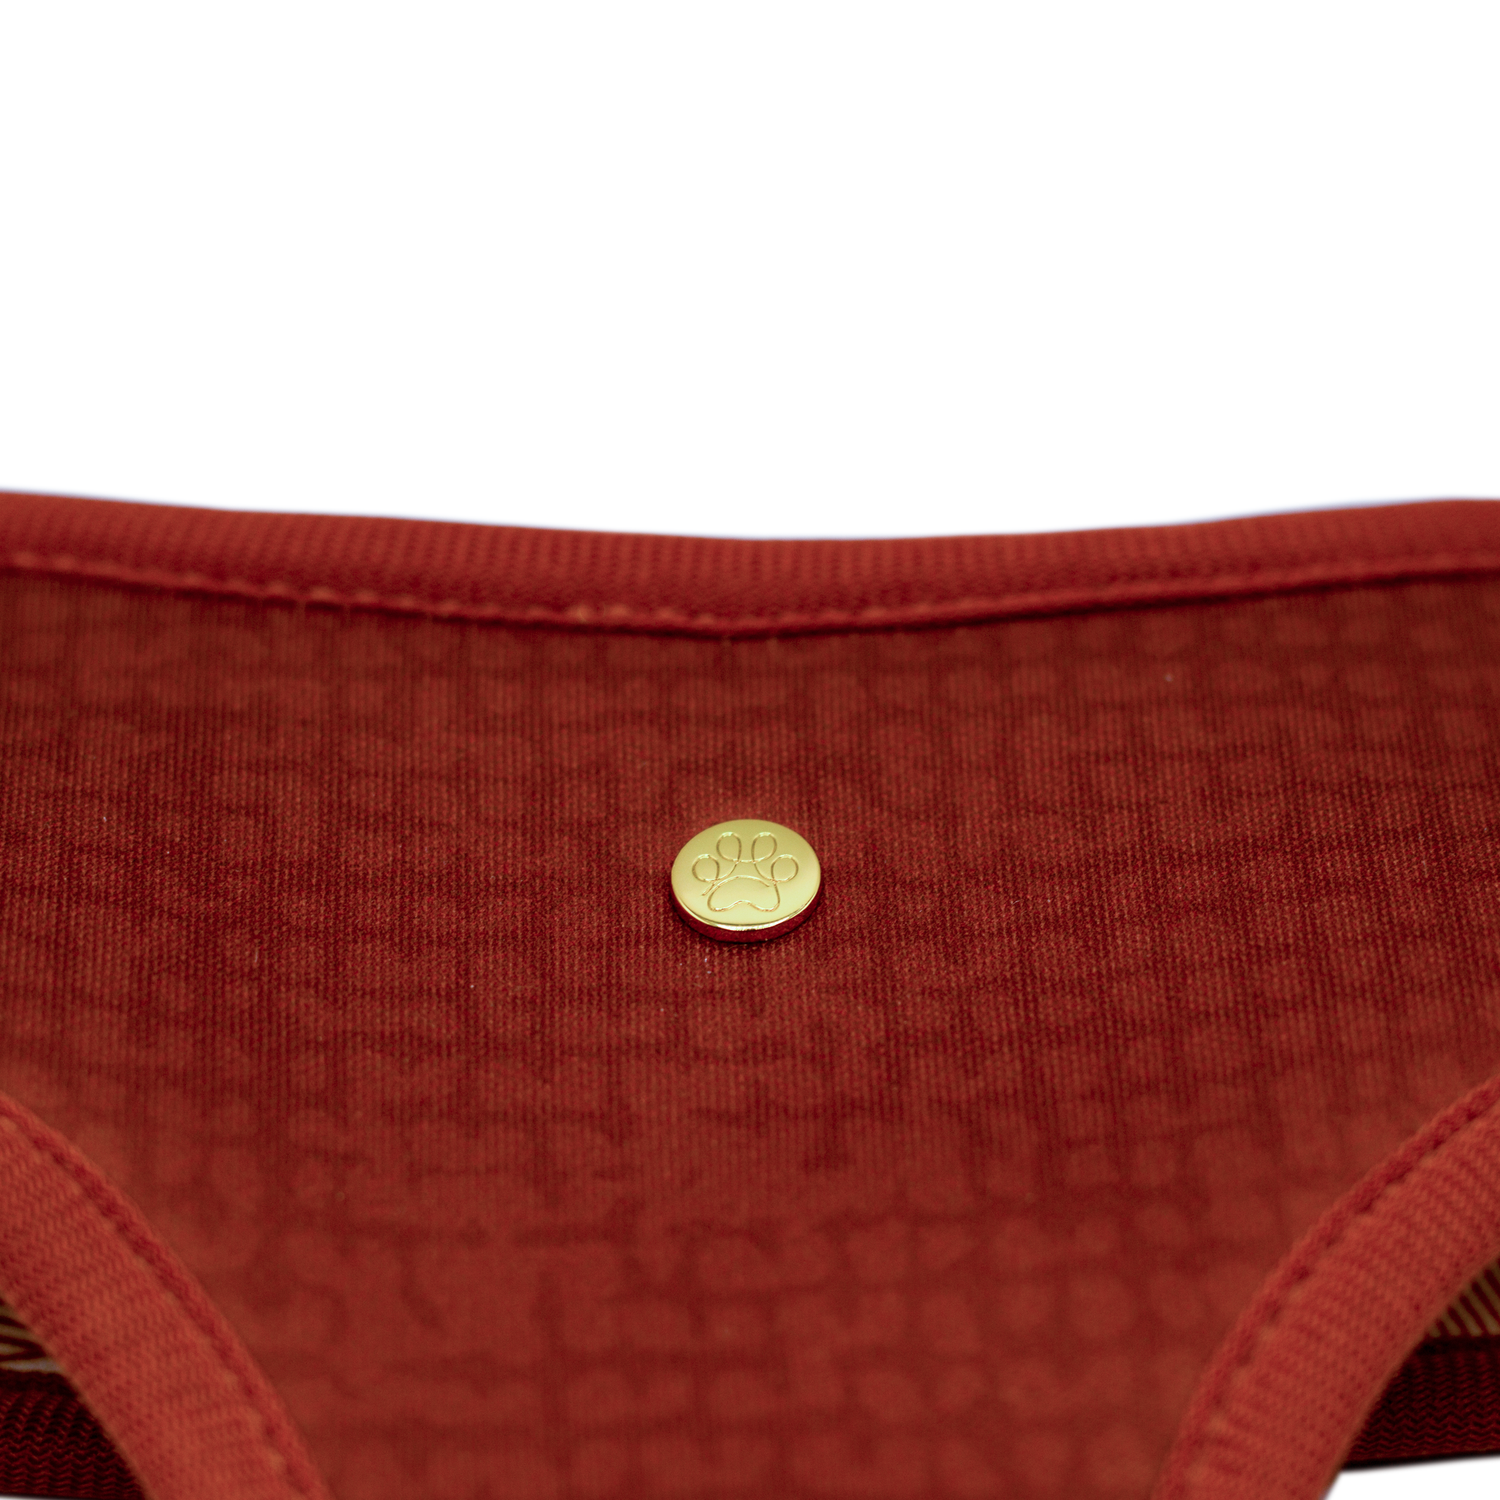 Pata Paw  autumn crunch reversible harness showing a close-up of its golden paw and a timeless and chic texture pattern in cherrywood.